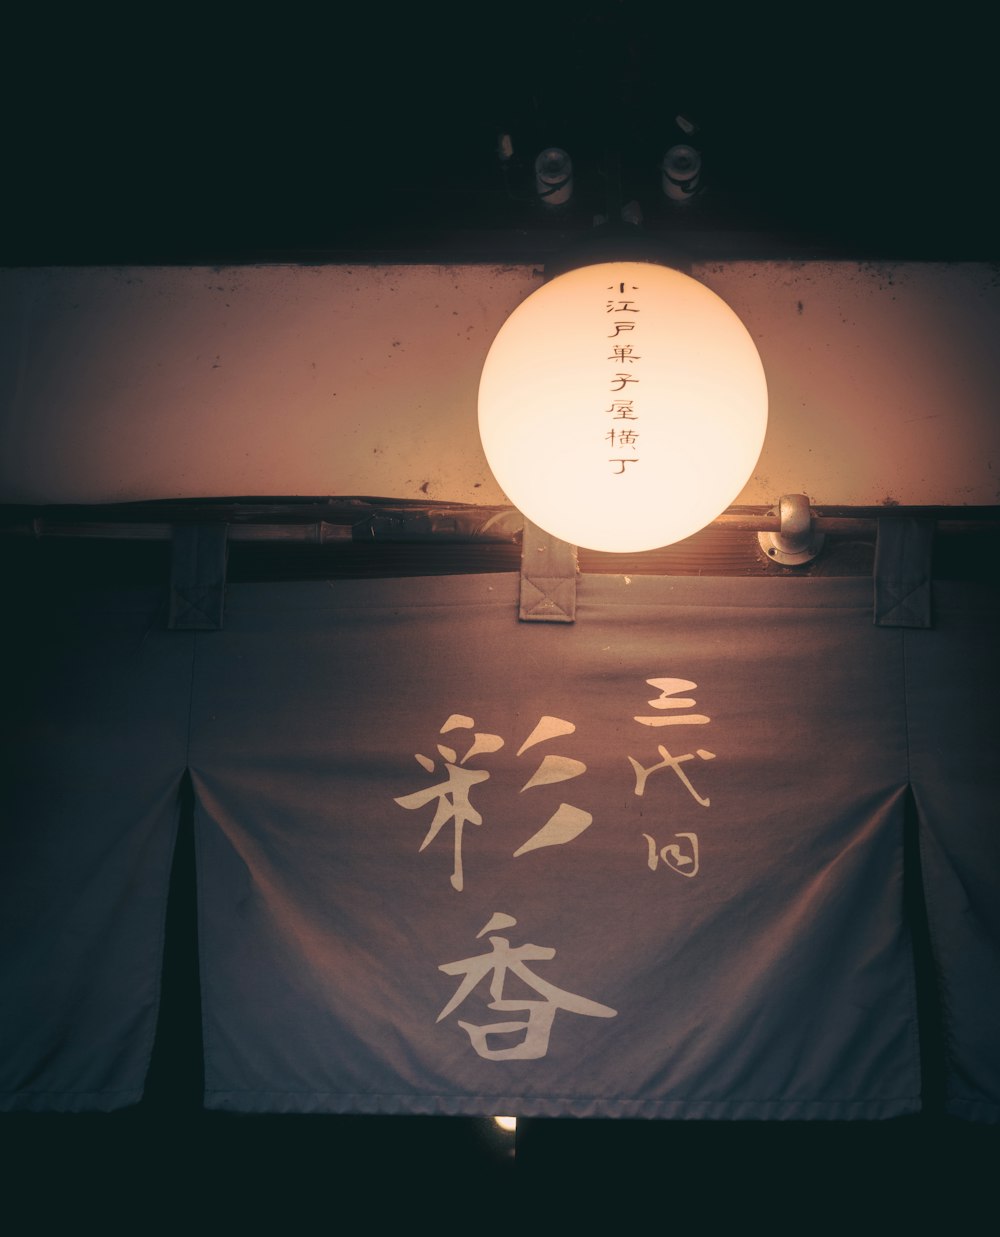 a lit up sign with asian writing on it